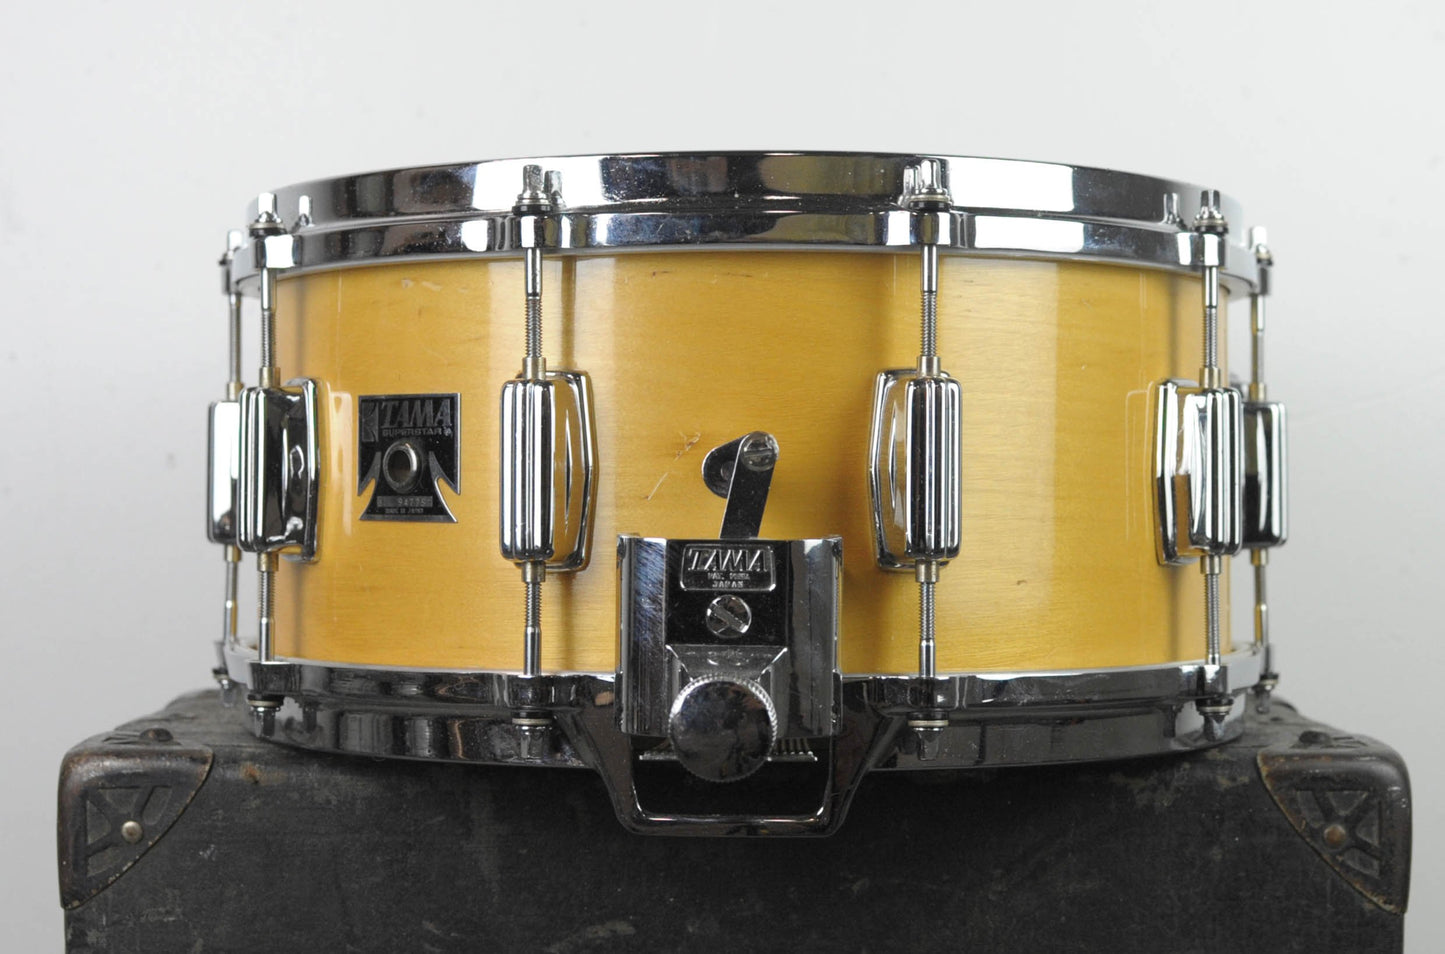 1970s Tama Superstar 6.5x14 "Wood Shell King Beat" No. 9606 Snare Drum